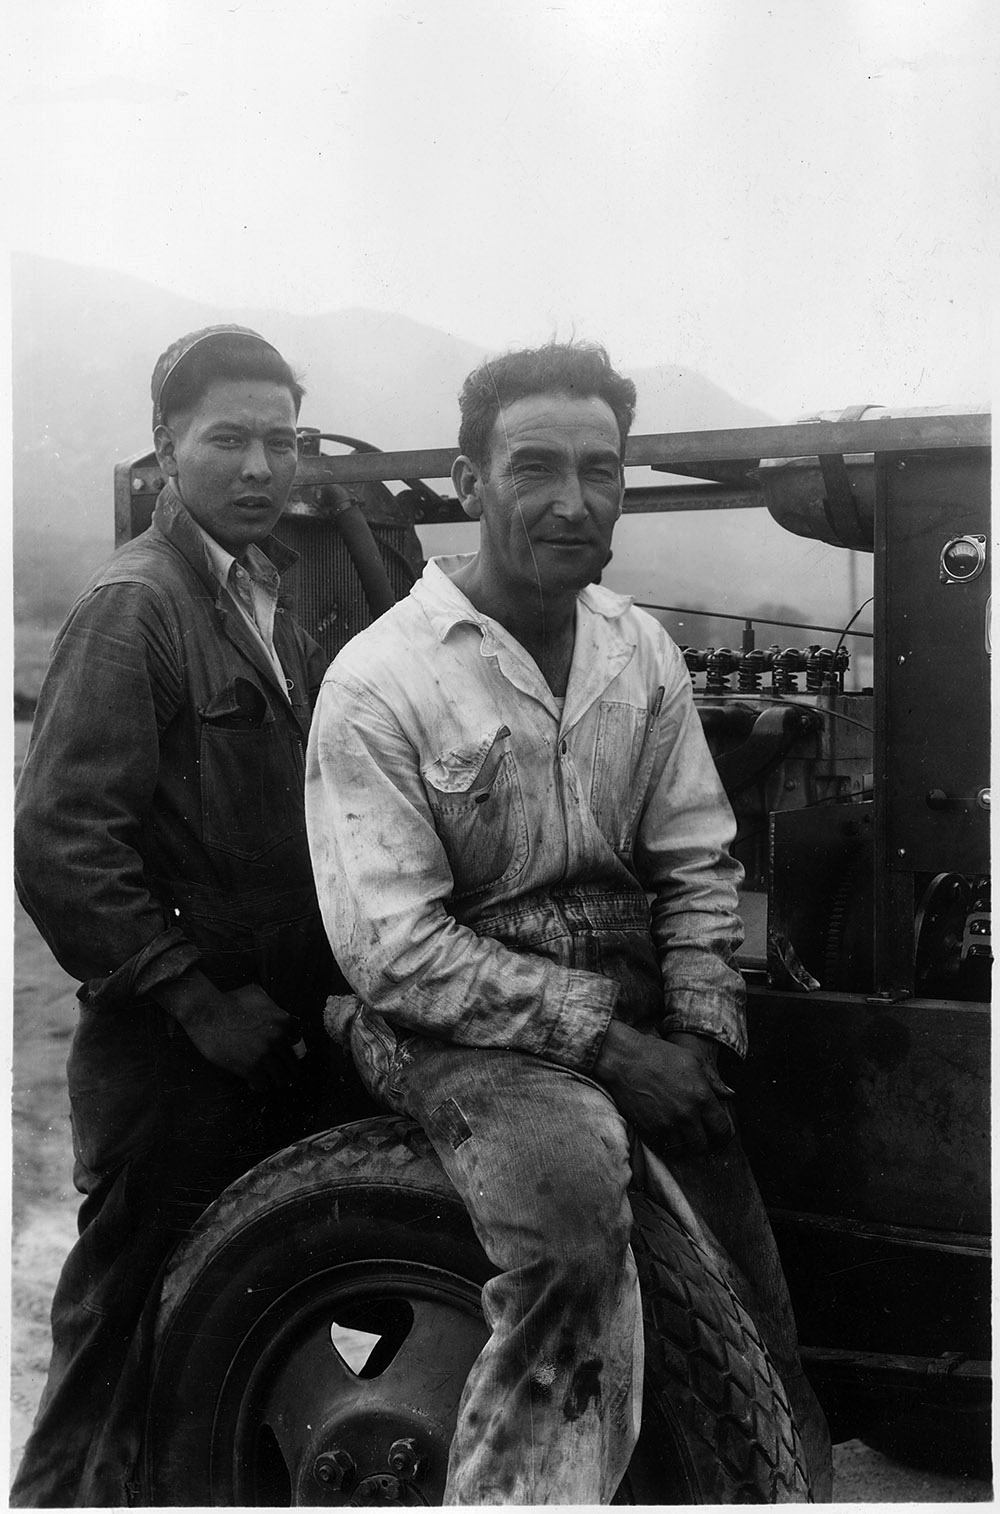 Eddie Brown and Theodore Armijo worked for the Mission Indian Agency